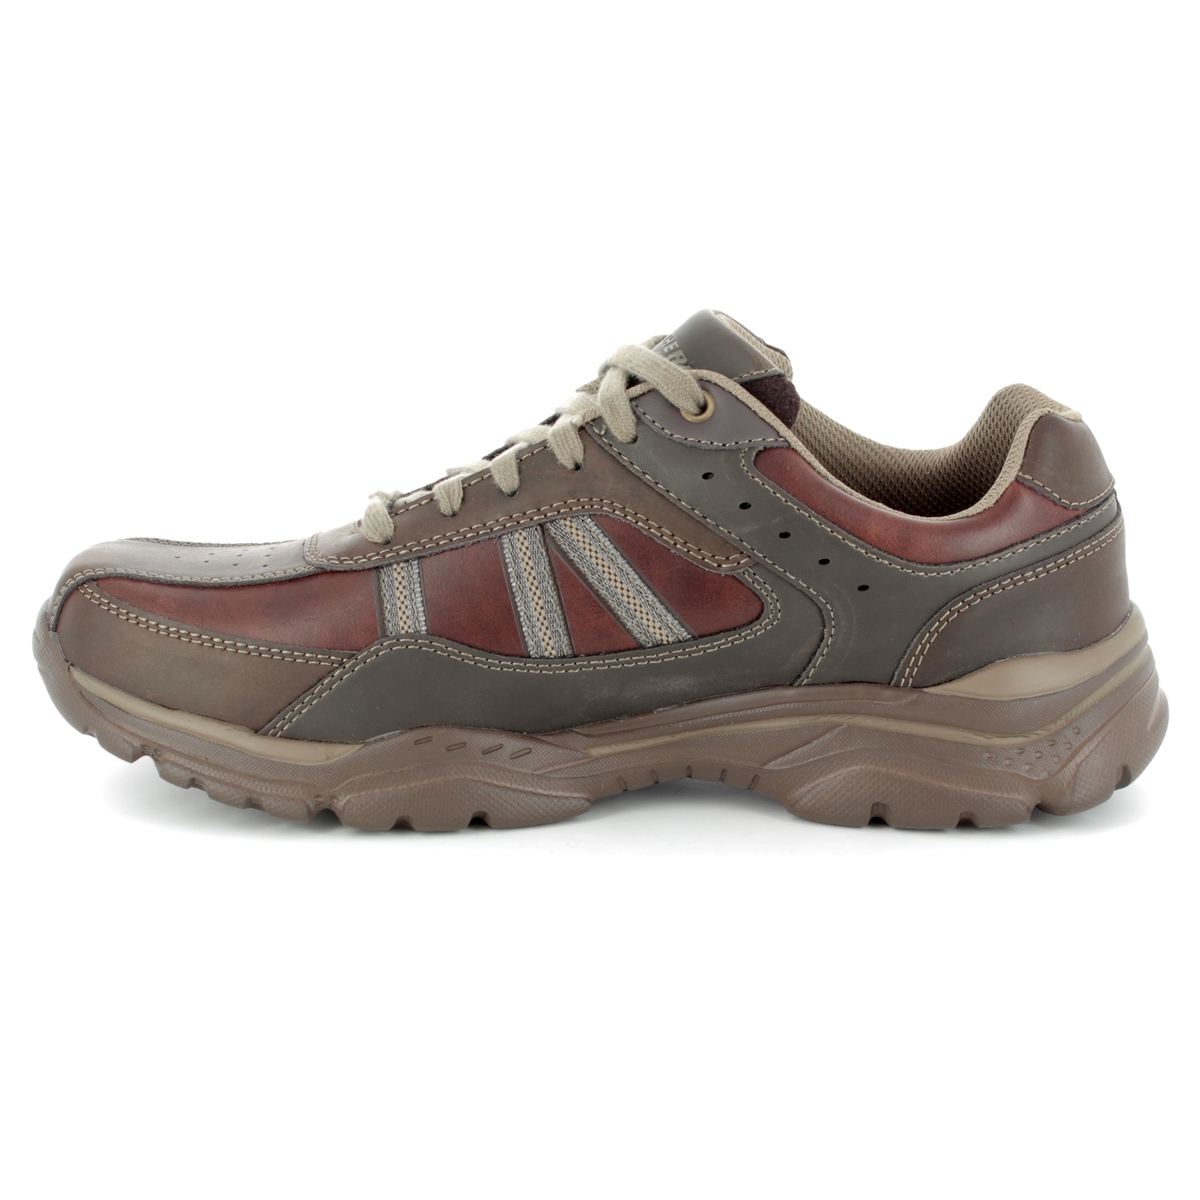 Skechers Ravato Texon Relaxed Fit 65418 CHOC Chocolate brown comfort shoes